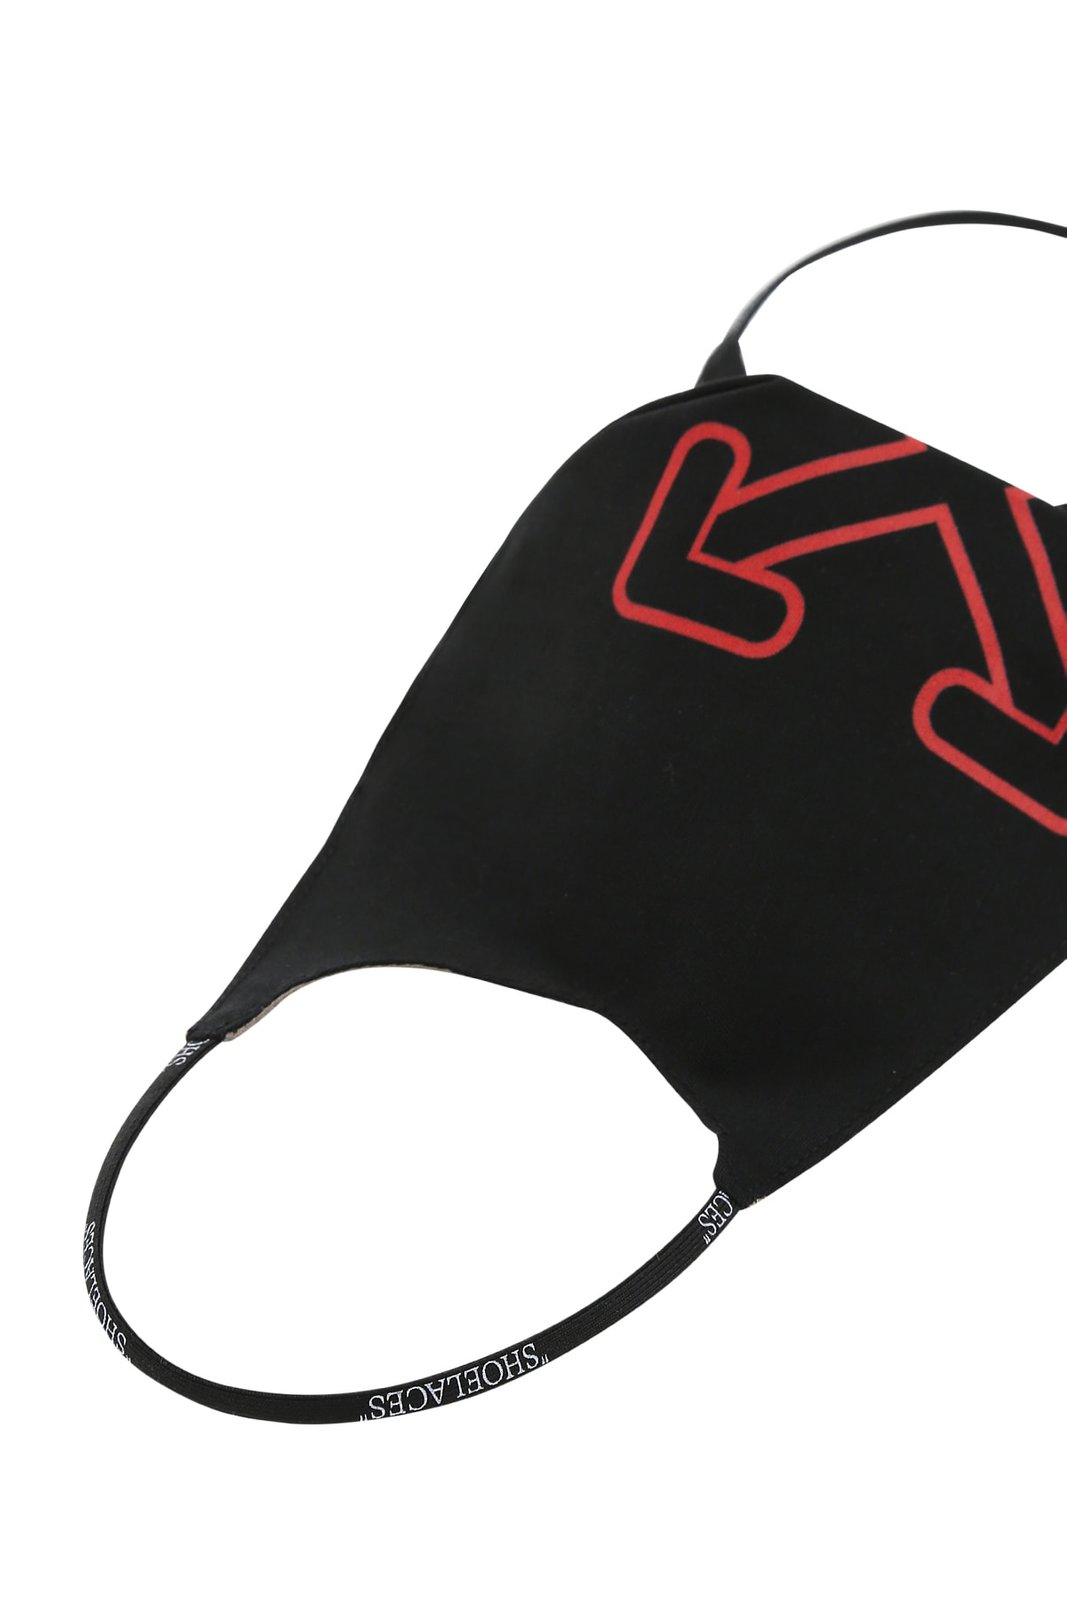 Off-White Arrow Motif Printed Face Mask